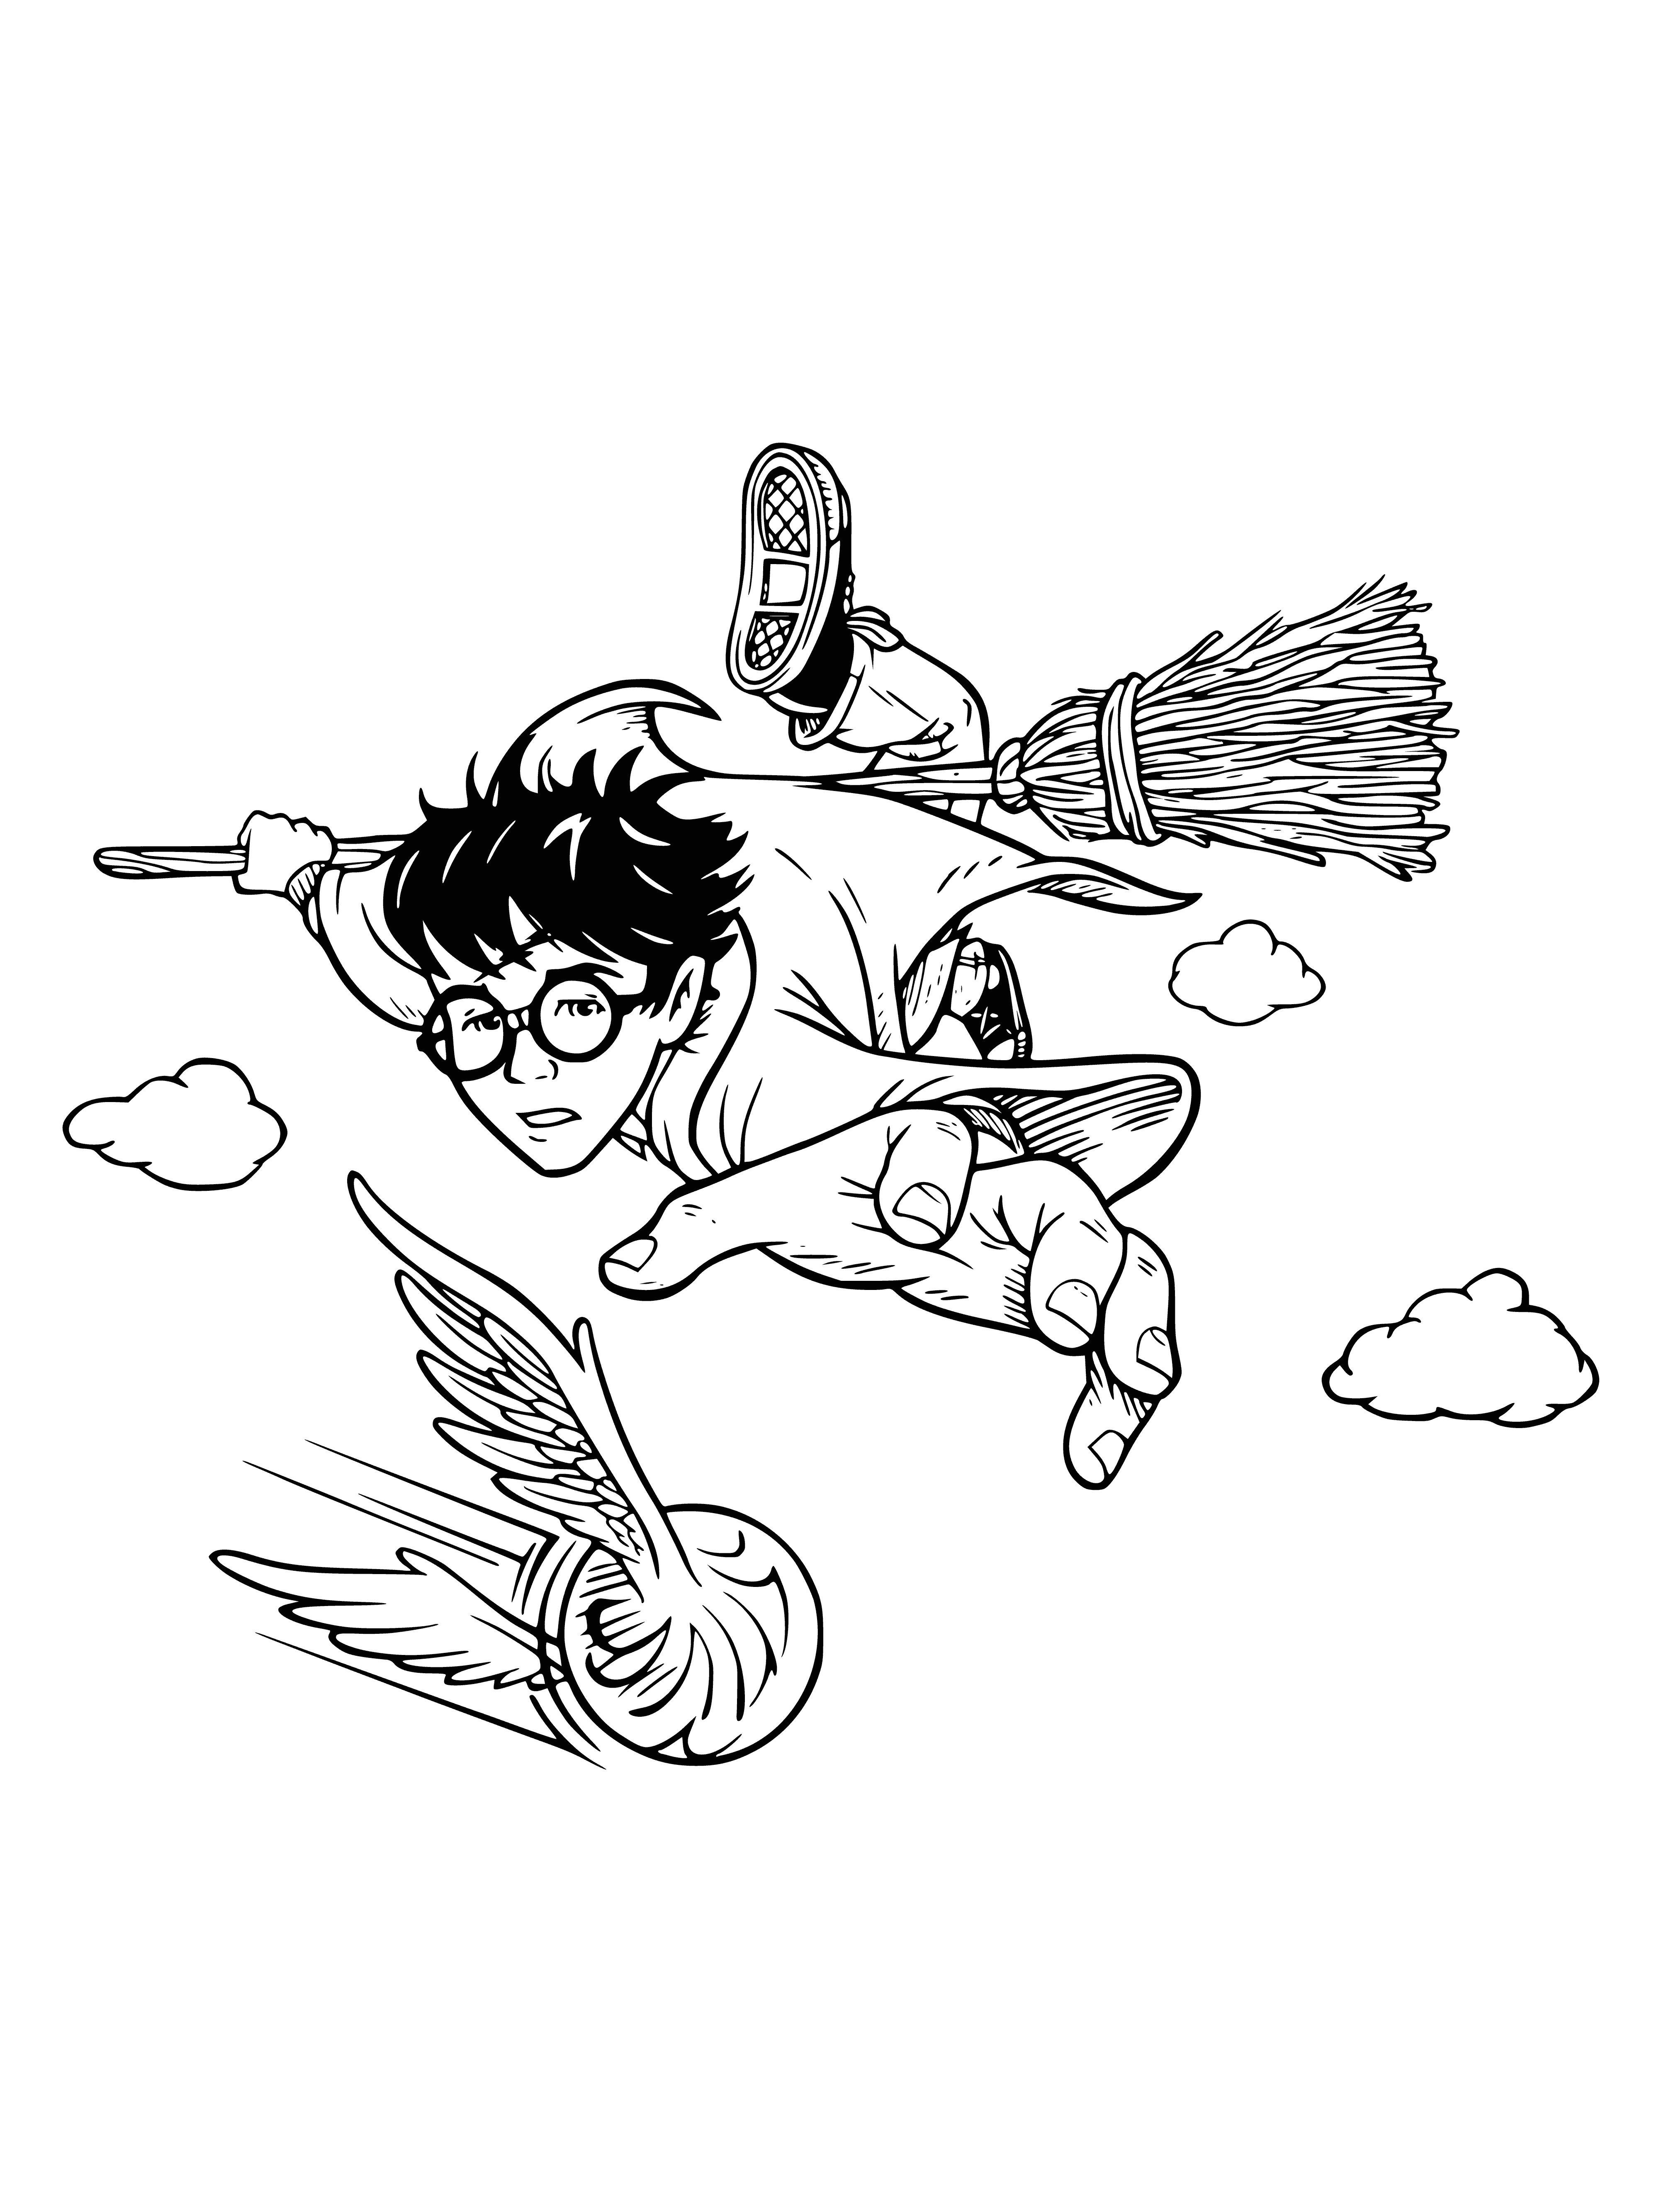 coloring page: Boy in robe flying on broomstick with wand, chasing ball with other wizards in the air.